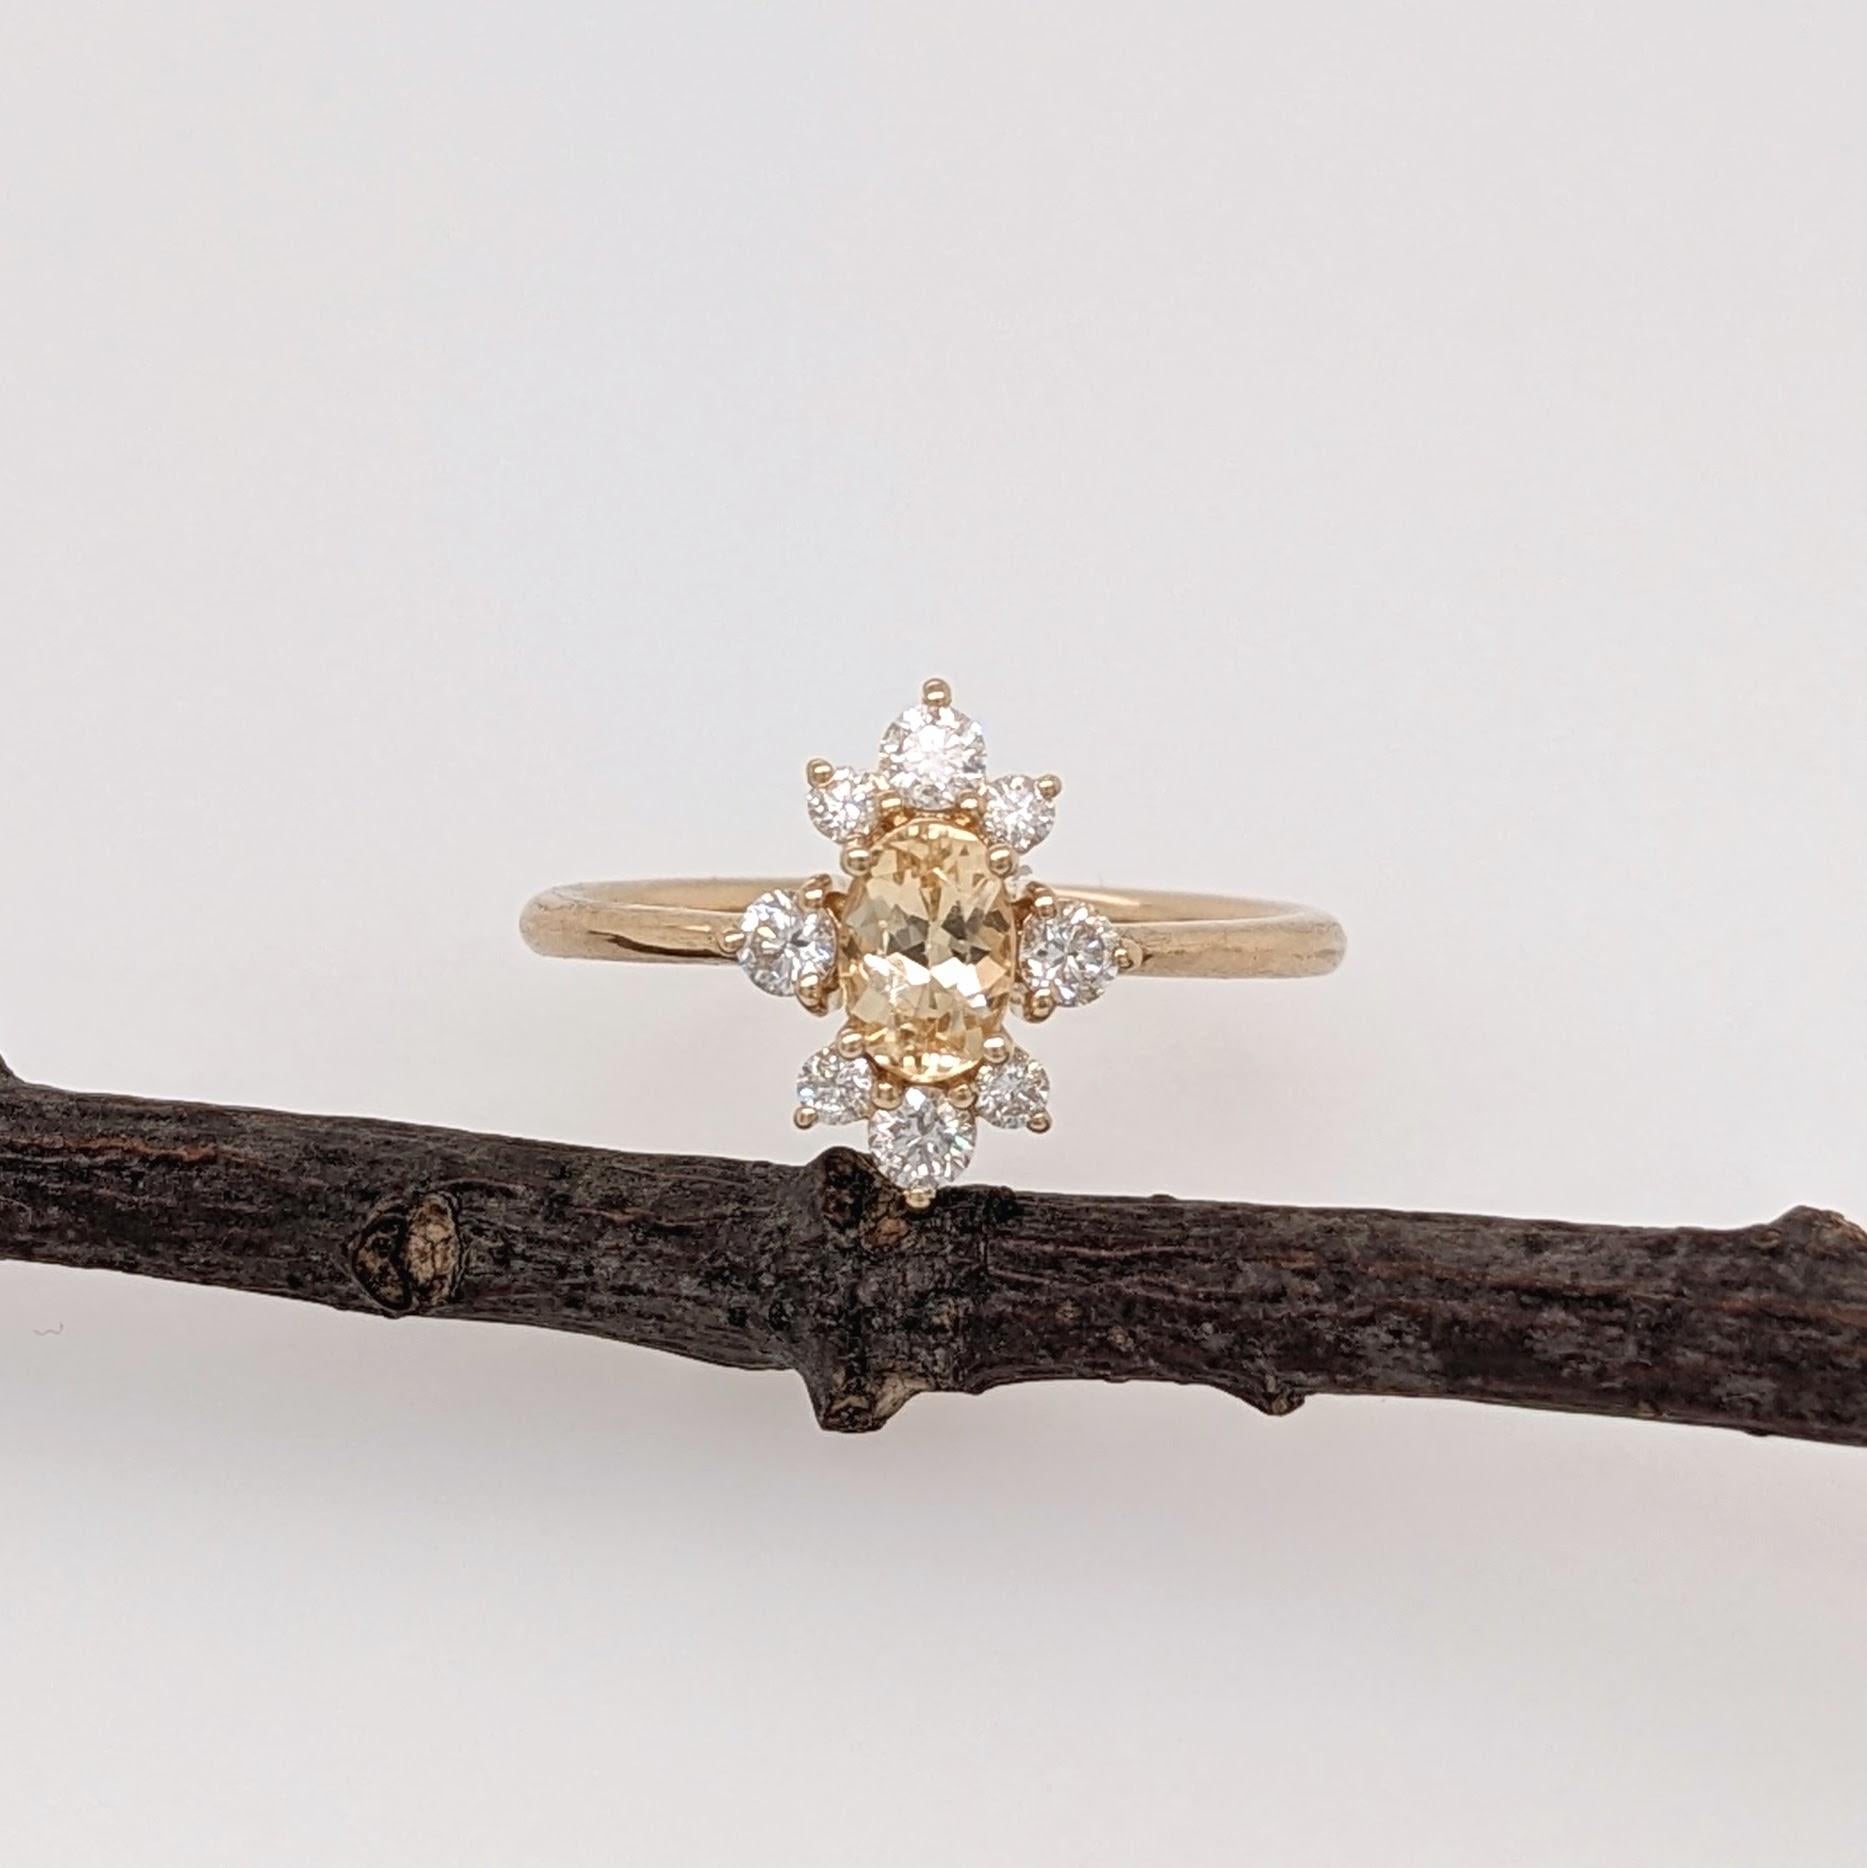 Adorable bright Yellow Topaz ring with a 14k Yellow Gold setting and natural Diamond accents. A cute and dainty piece for that person that fills your life with golden light!

Specifications

Item Type: Ring
Center Stone: Imperial Topaz
Treatment: